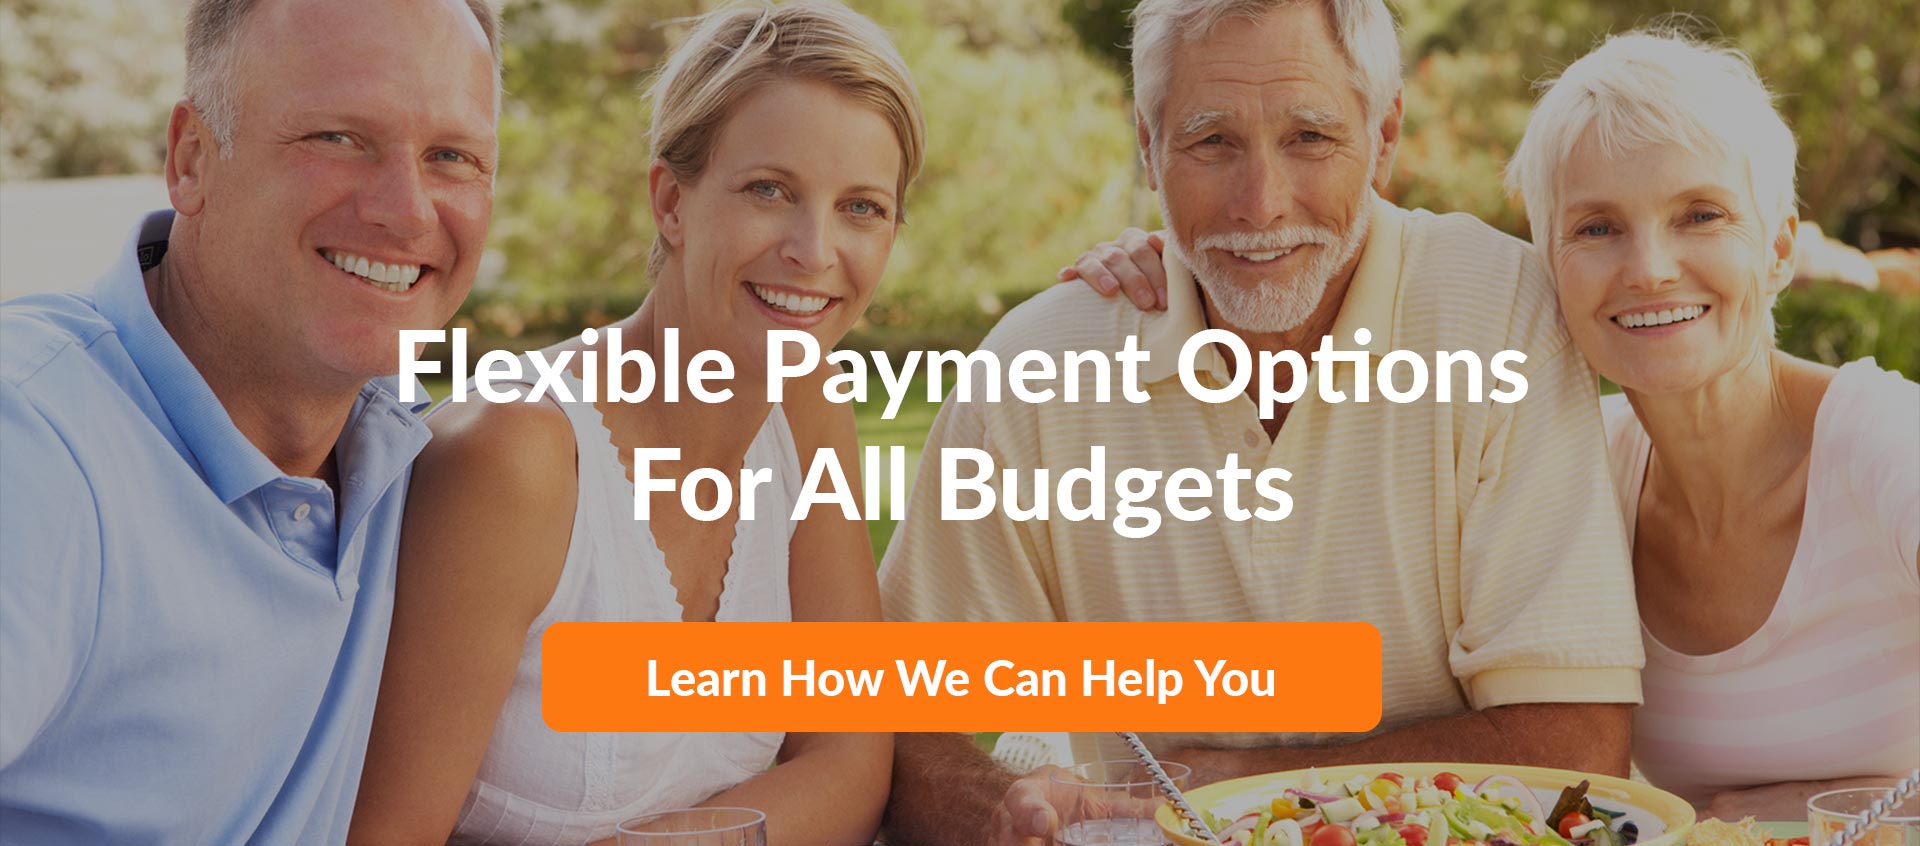 flexible payment options for all budgets